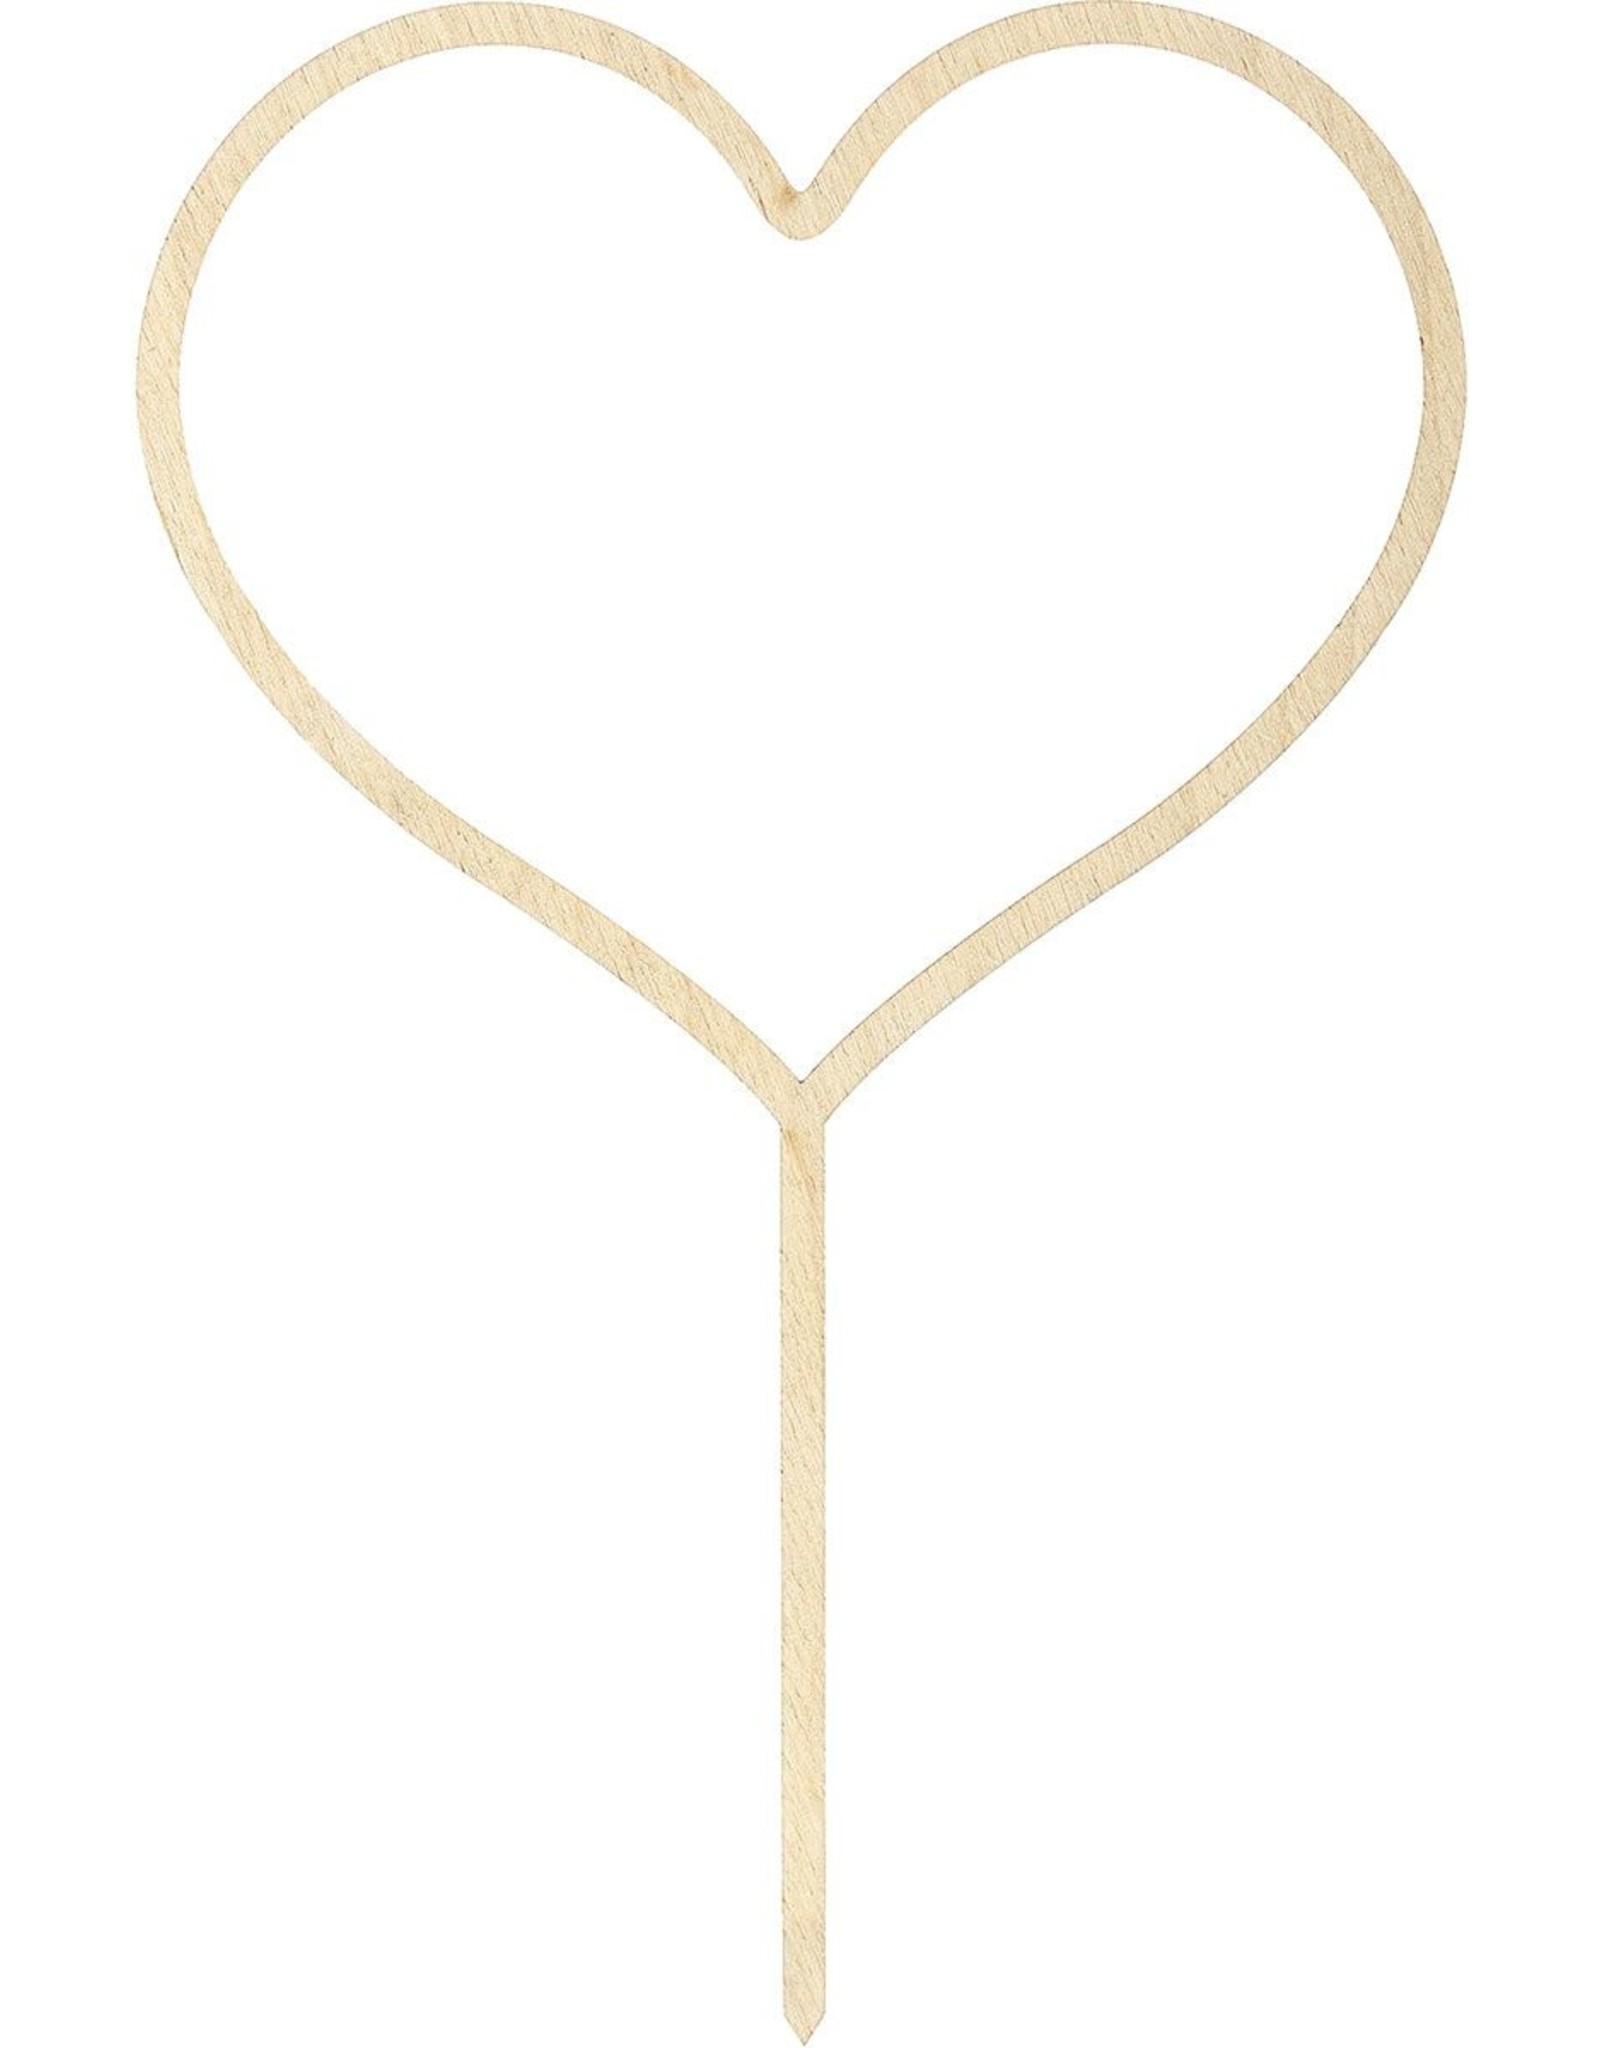 PartyDeco PartyDeco Wooden Cake Topper Hart 23 cm